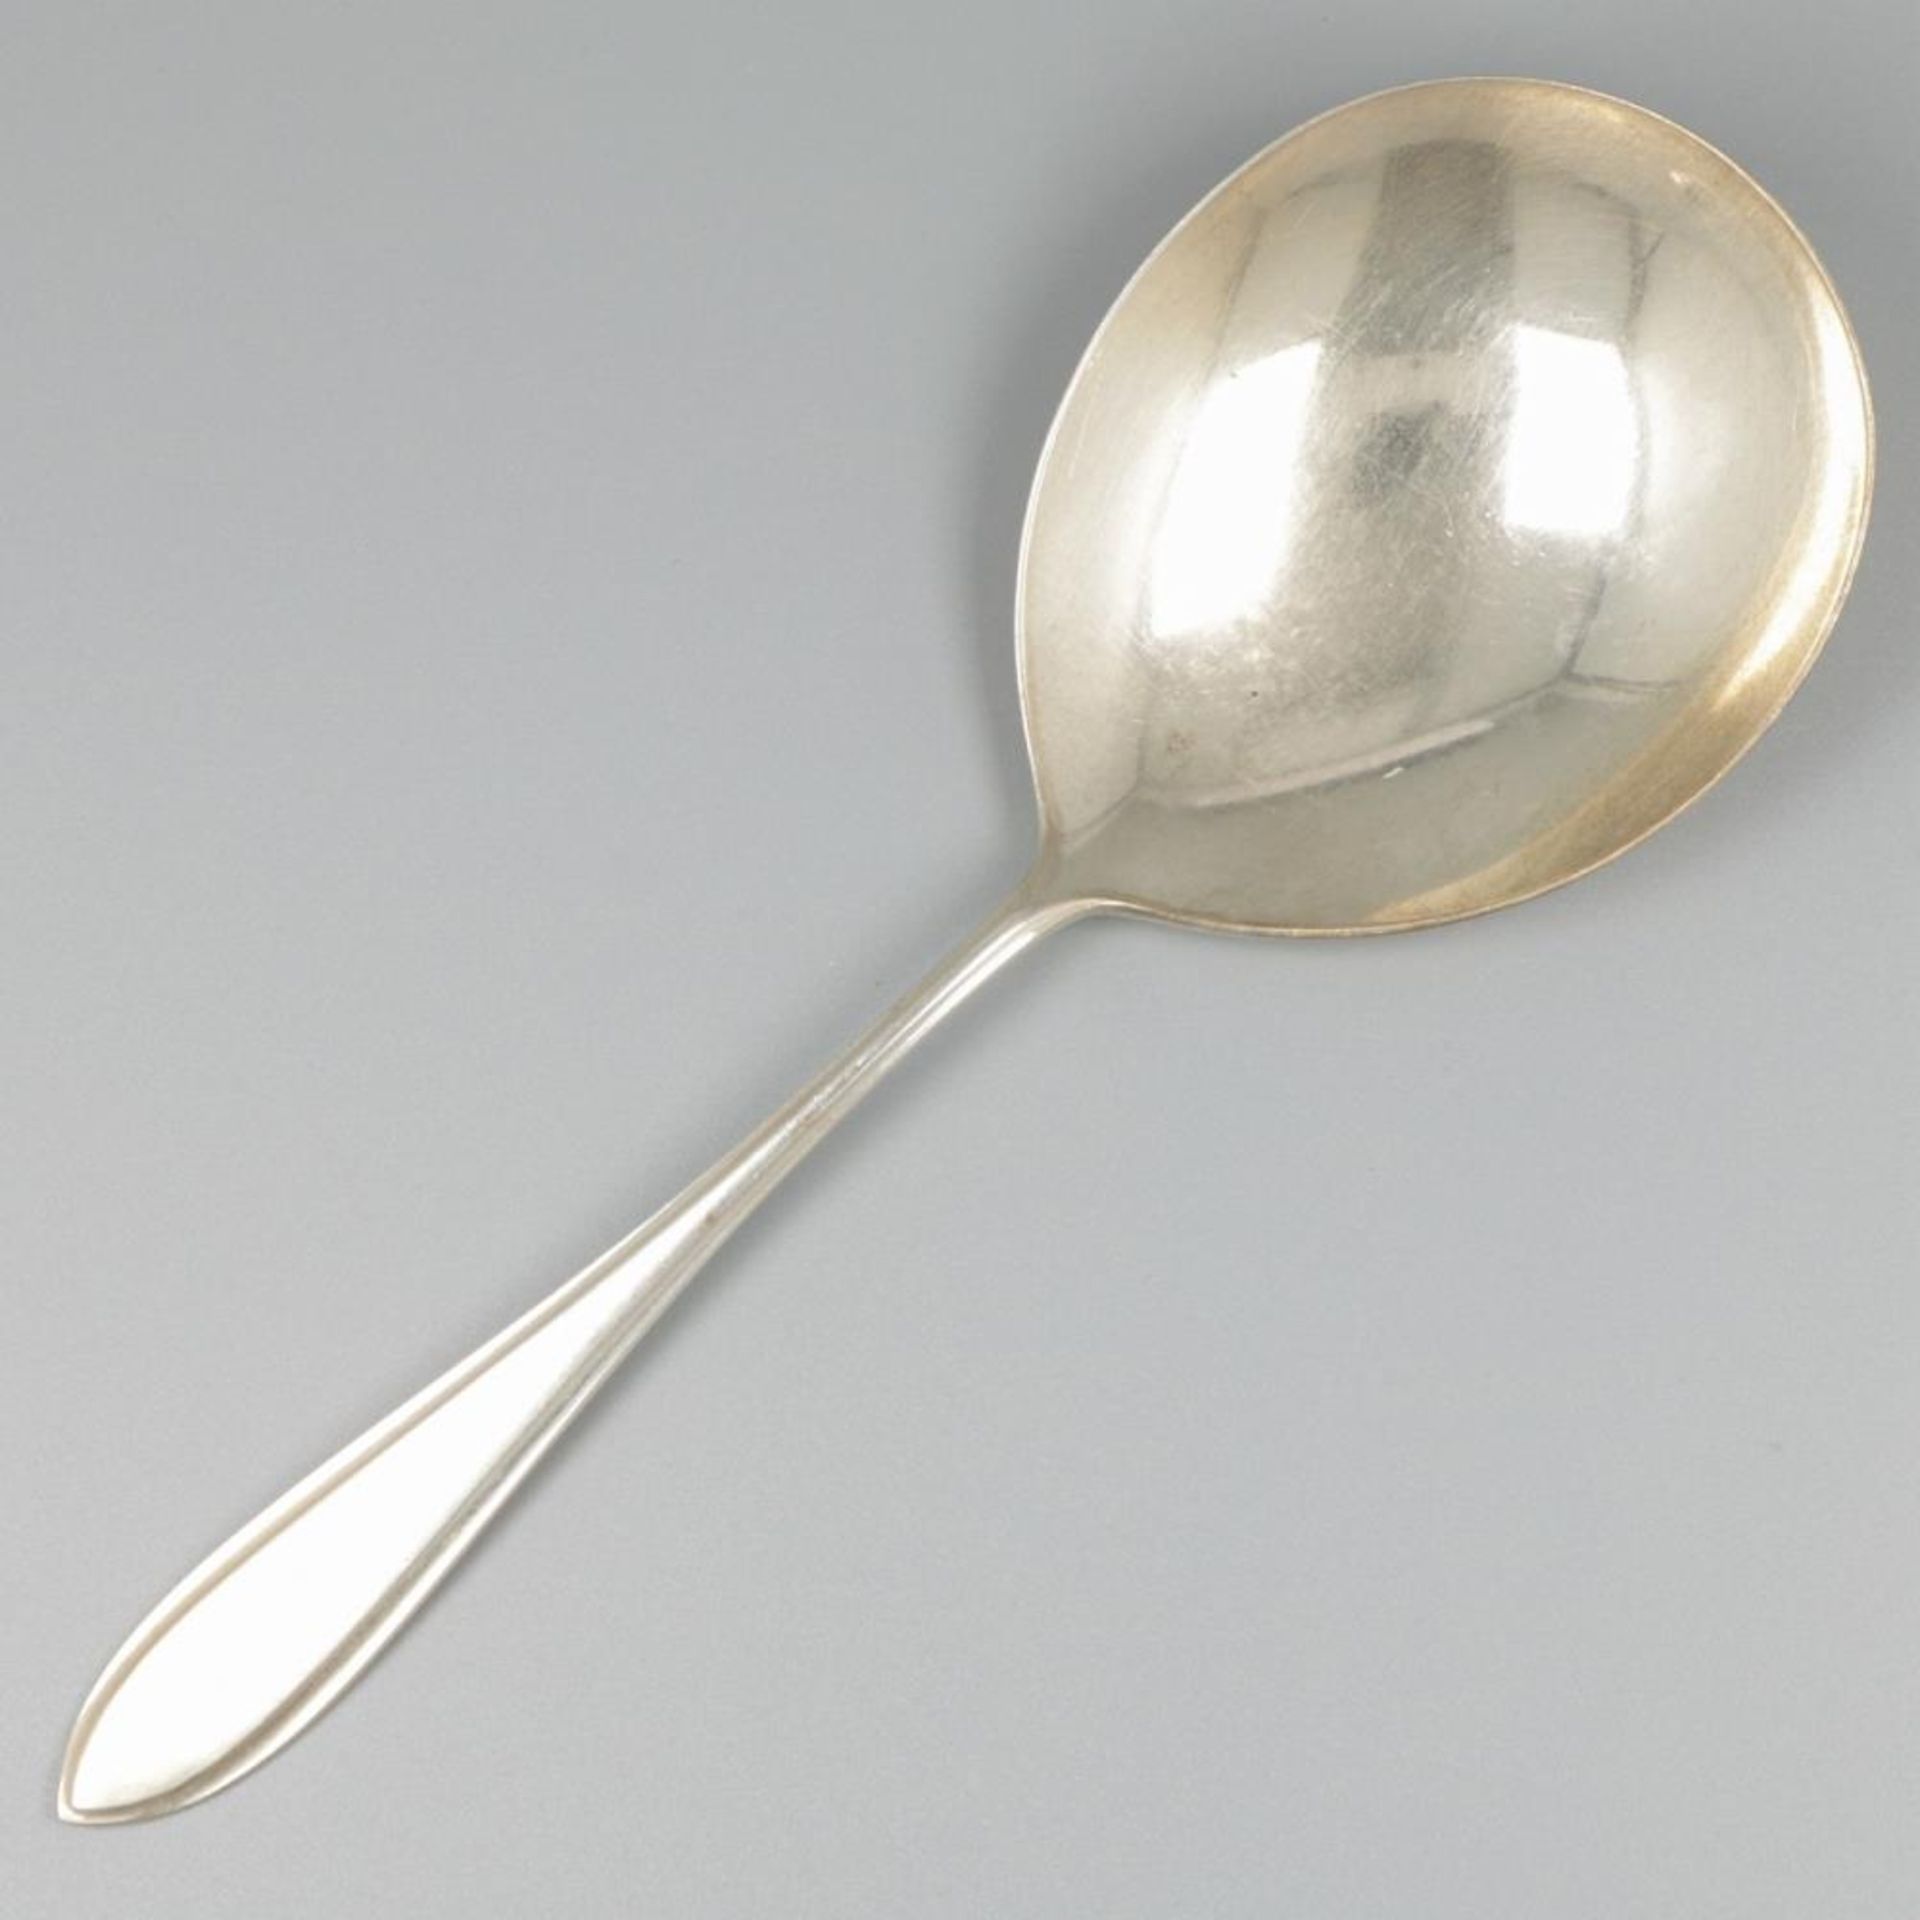 Rice spoon silver.